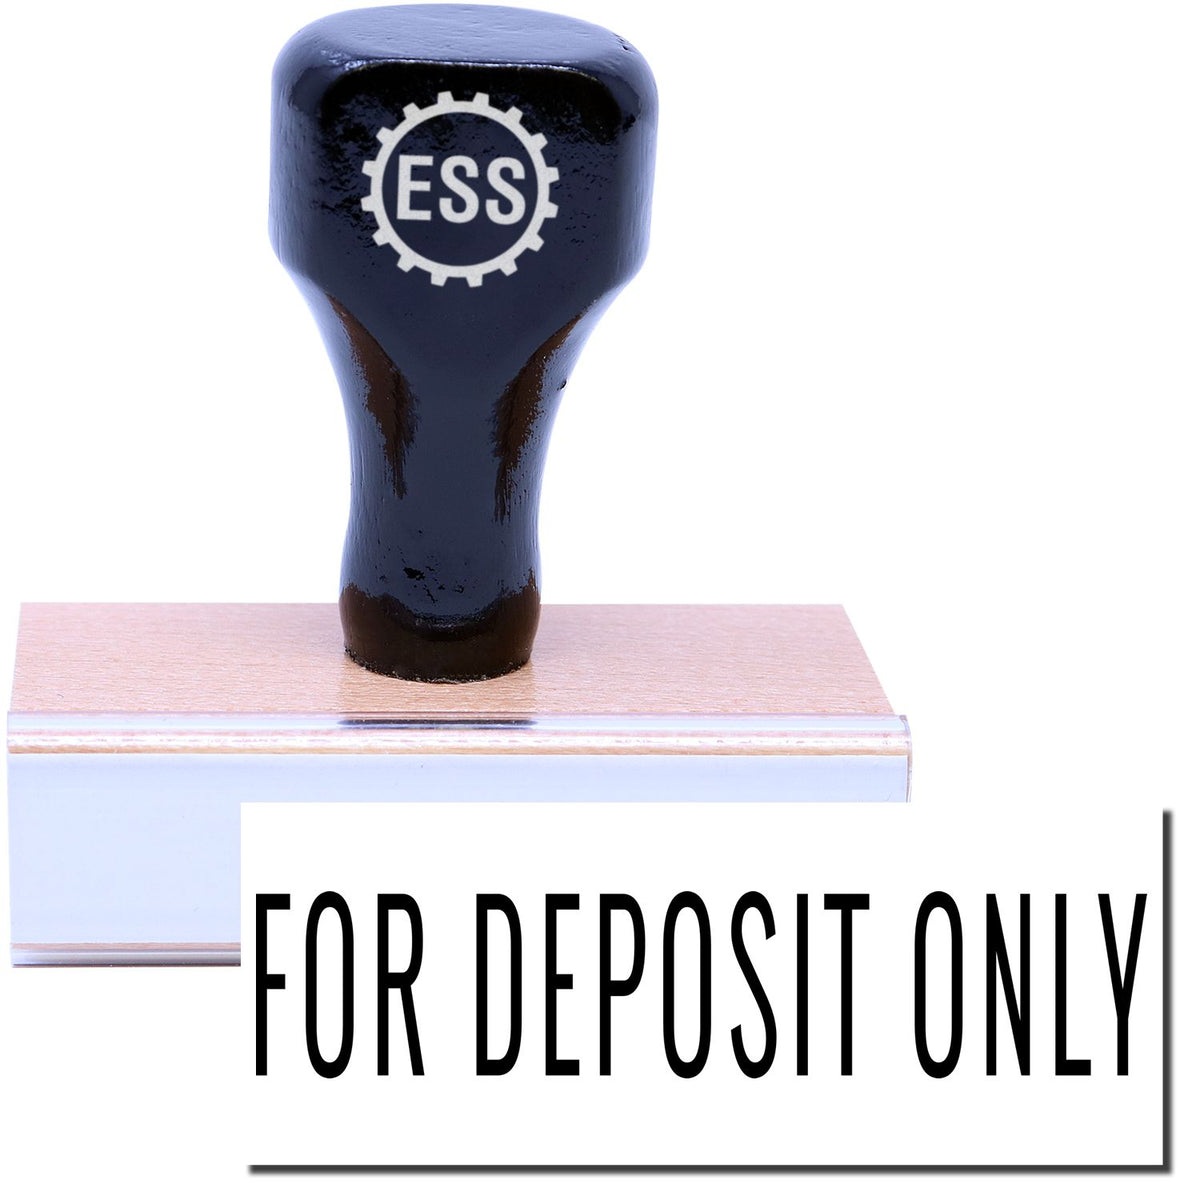 A stock office rubber stamp with a stamped image showing how the text &quot;FOR DEPOSIT ONLY&quot; in a narrow font is displayed after stamping.